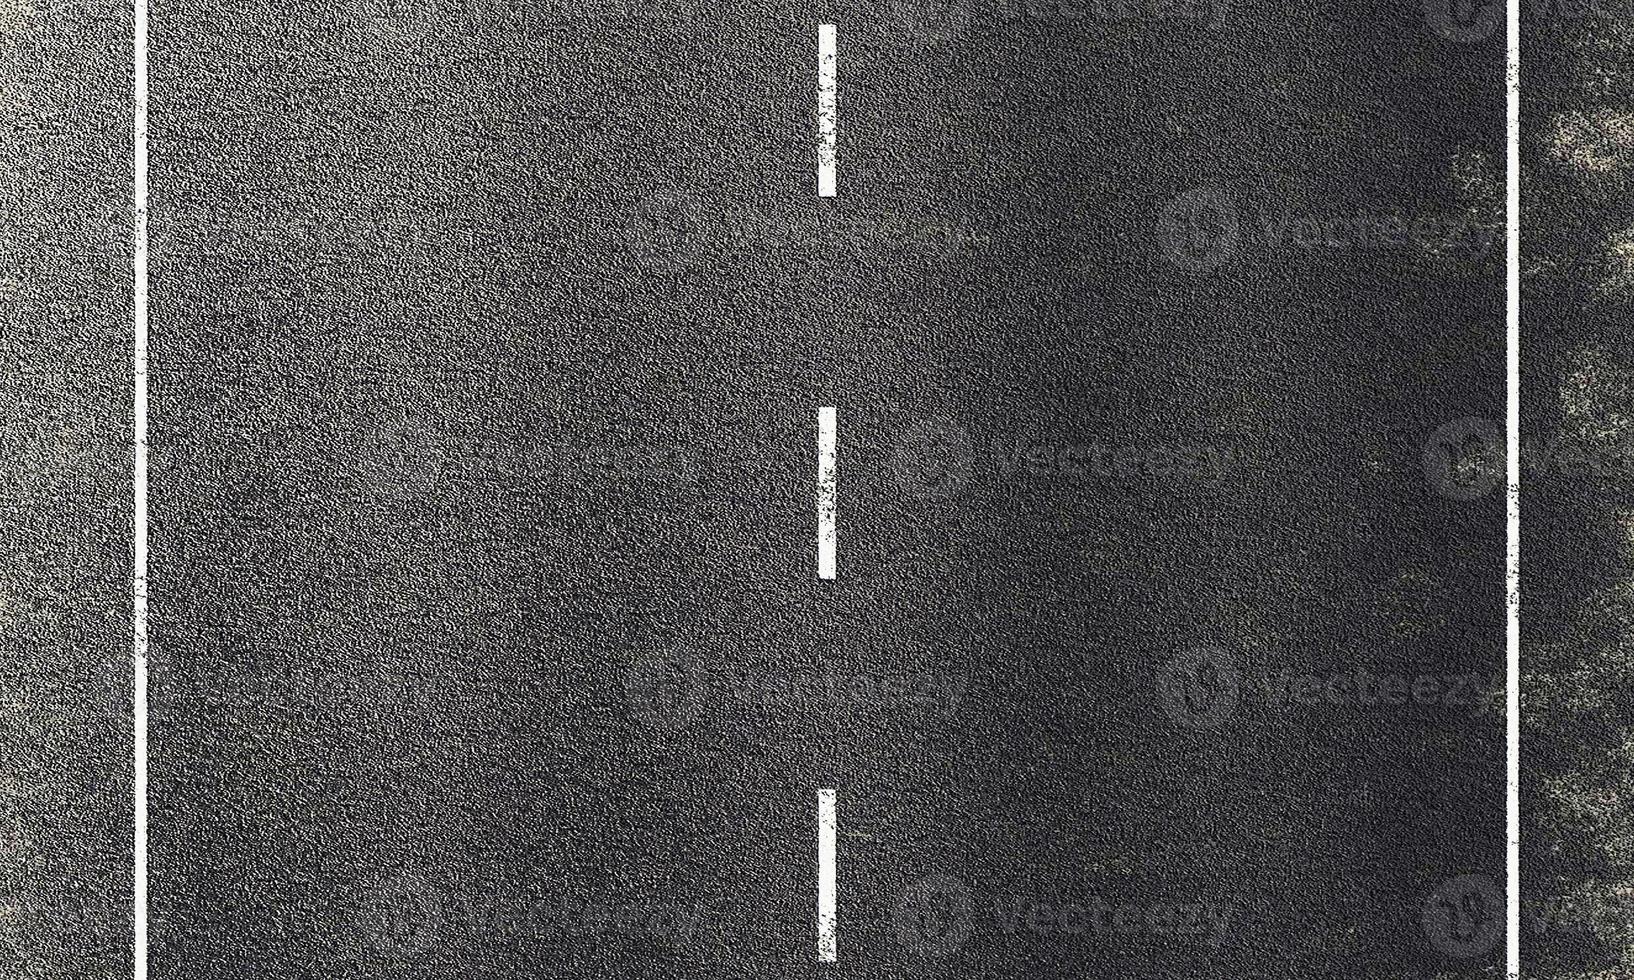 Top view rough and grunge asphalt road surface. Transport and Travel concept.This image has no blurriness and artifact, only depth of field and road texture. 3D illustration rendering photo